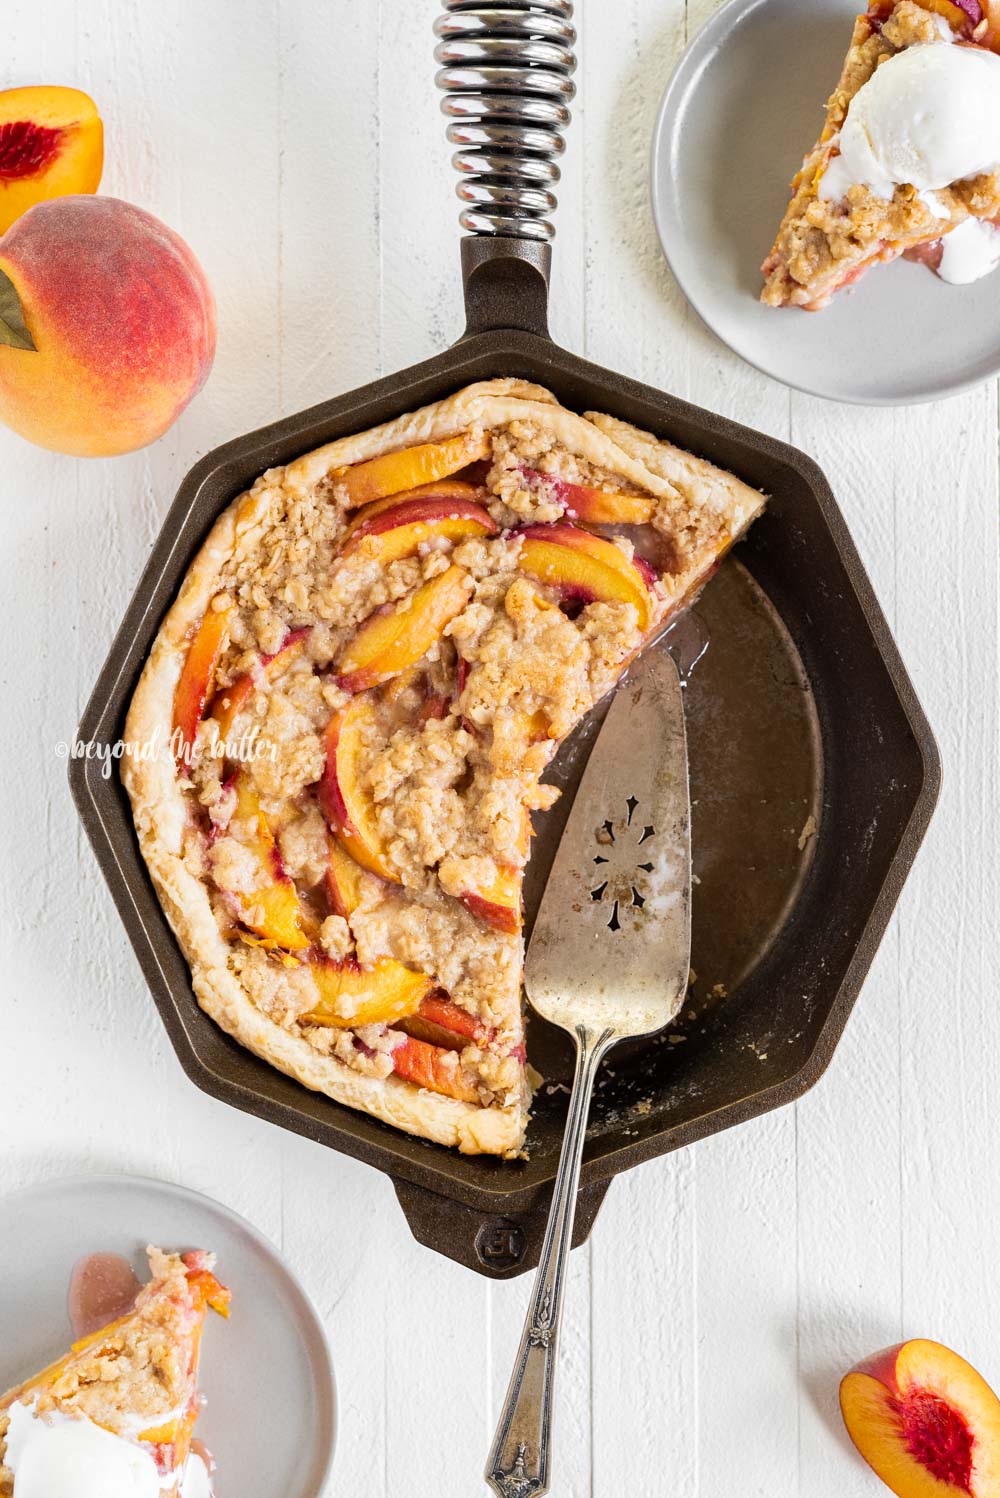 Brown Sugar Peach Crumble Pie Recipe | All Images © Beyond the Butter, LLC